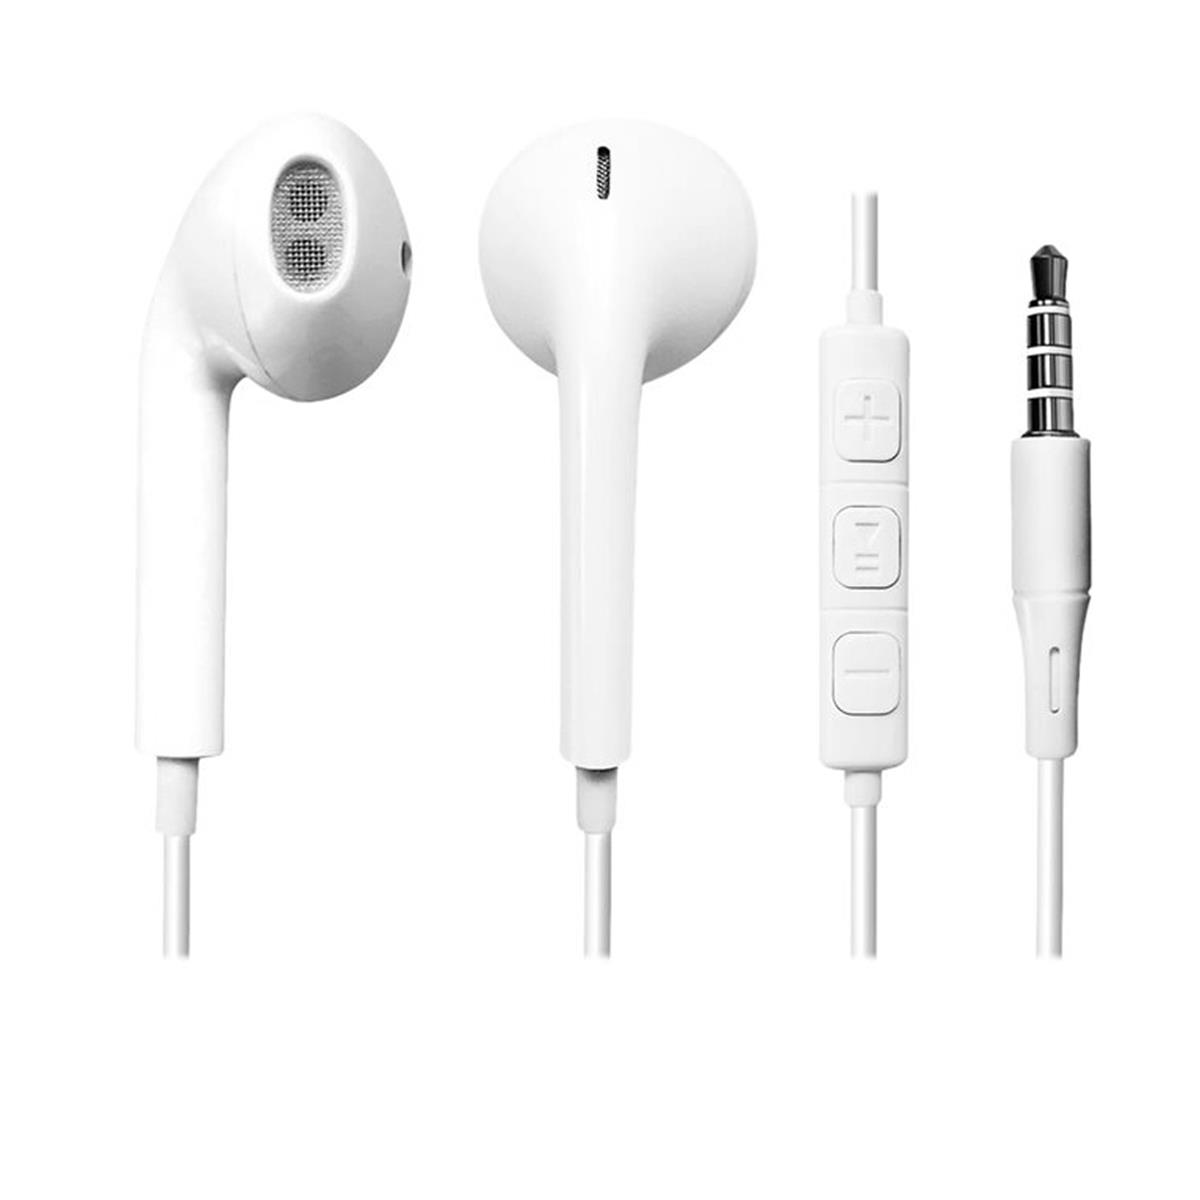 Image of iMicro SP-IMT11 Wired In-Ear Earphones